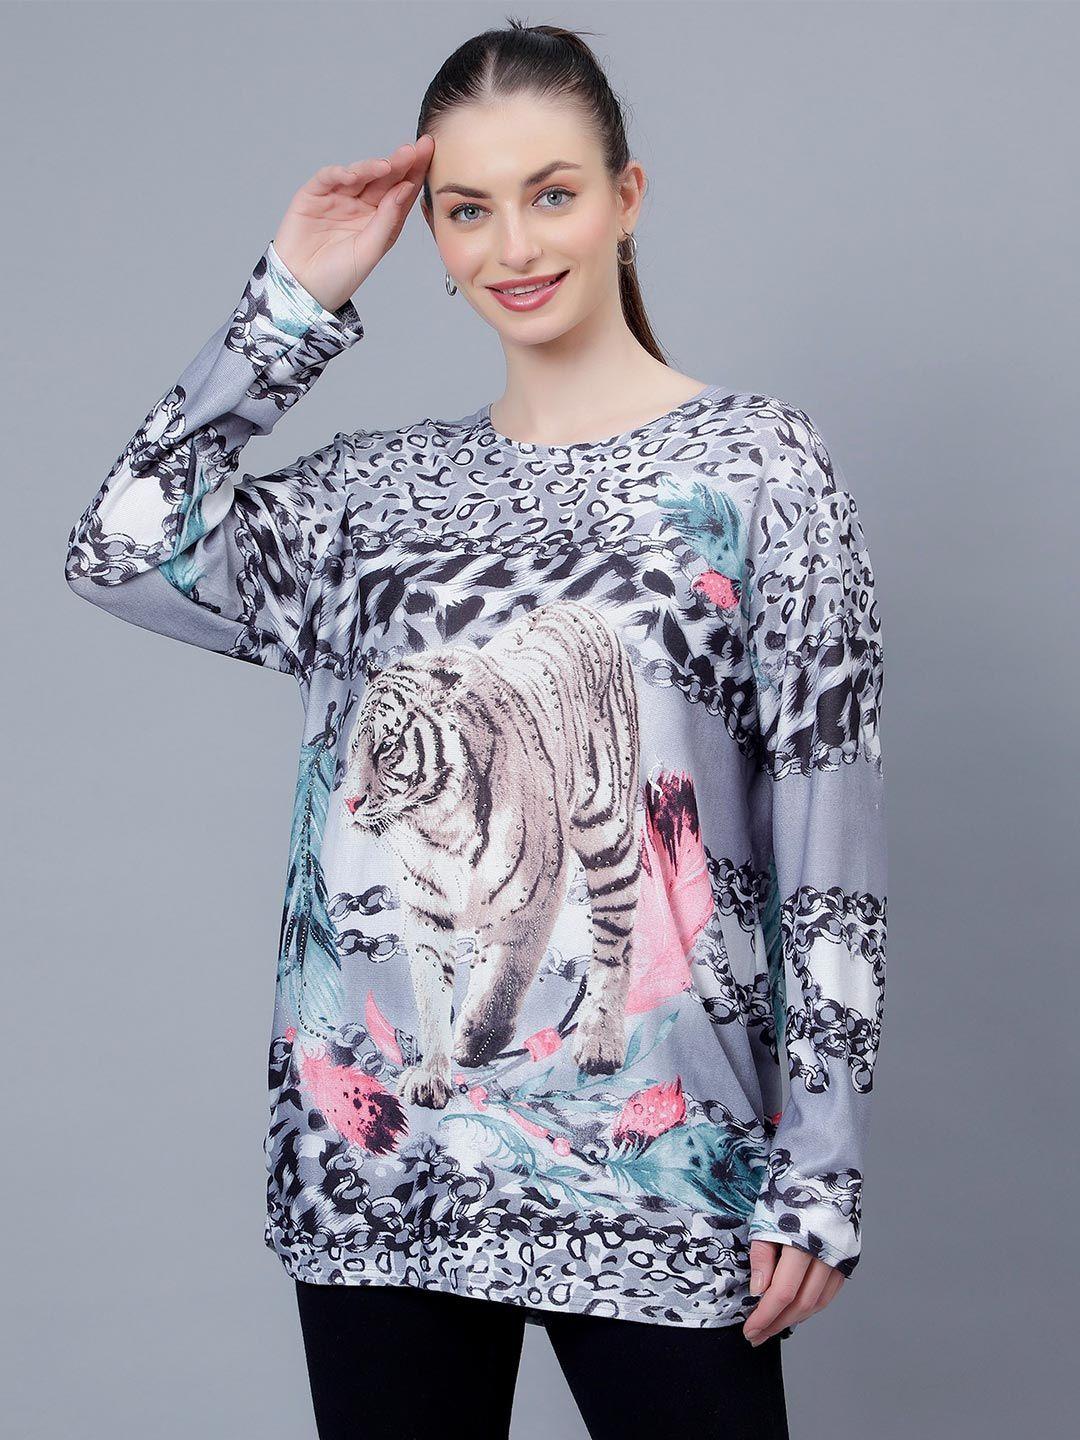 albion graphic printed pure cotton casual top